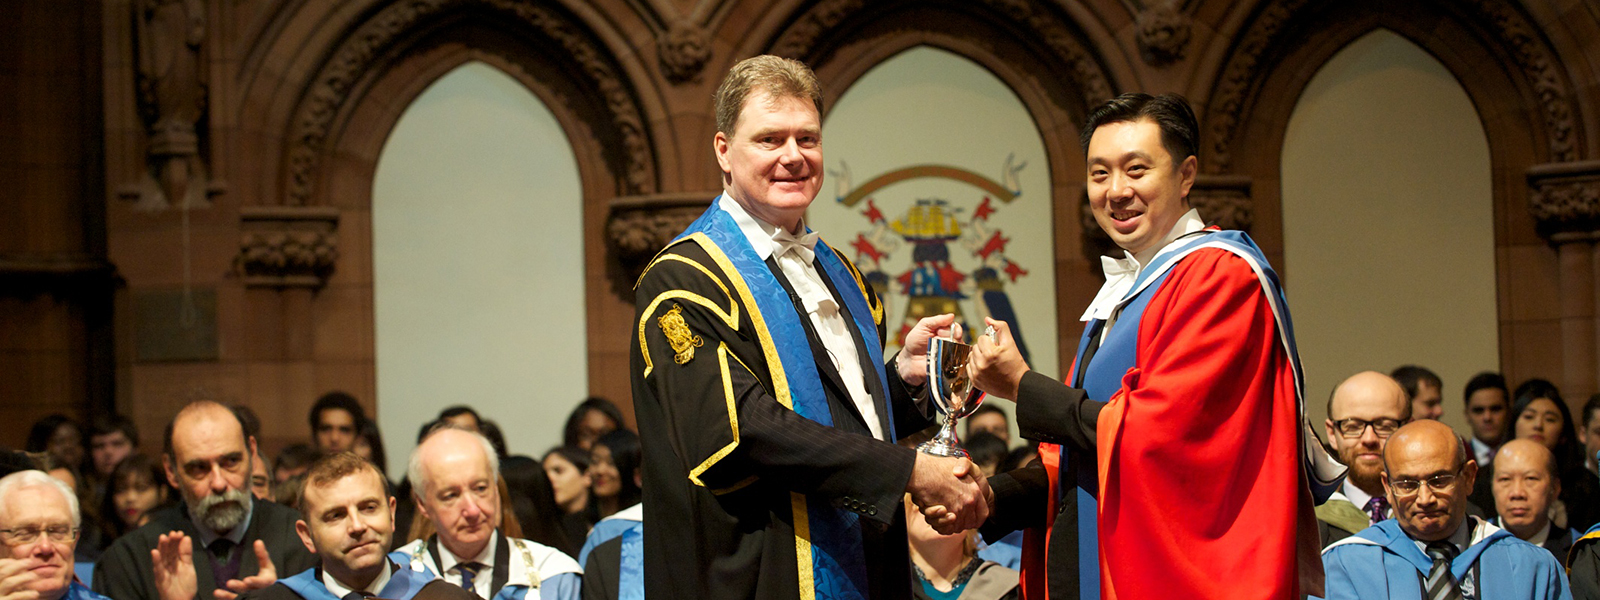 Guan Kiat Goh being presented with the 2015 Strathclyde People Award